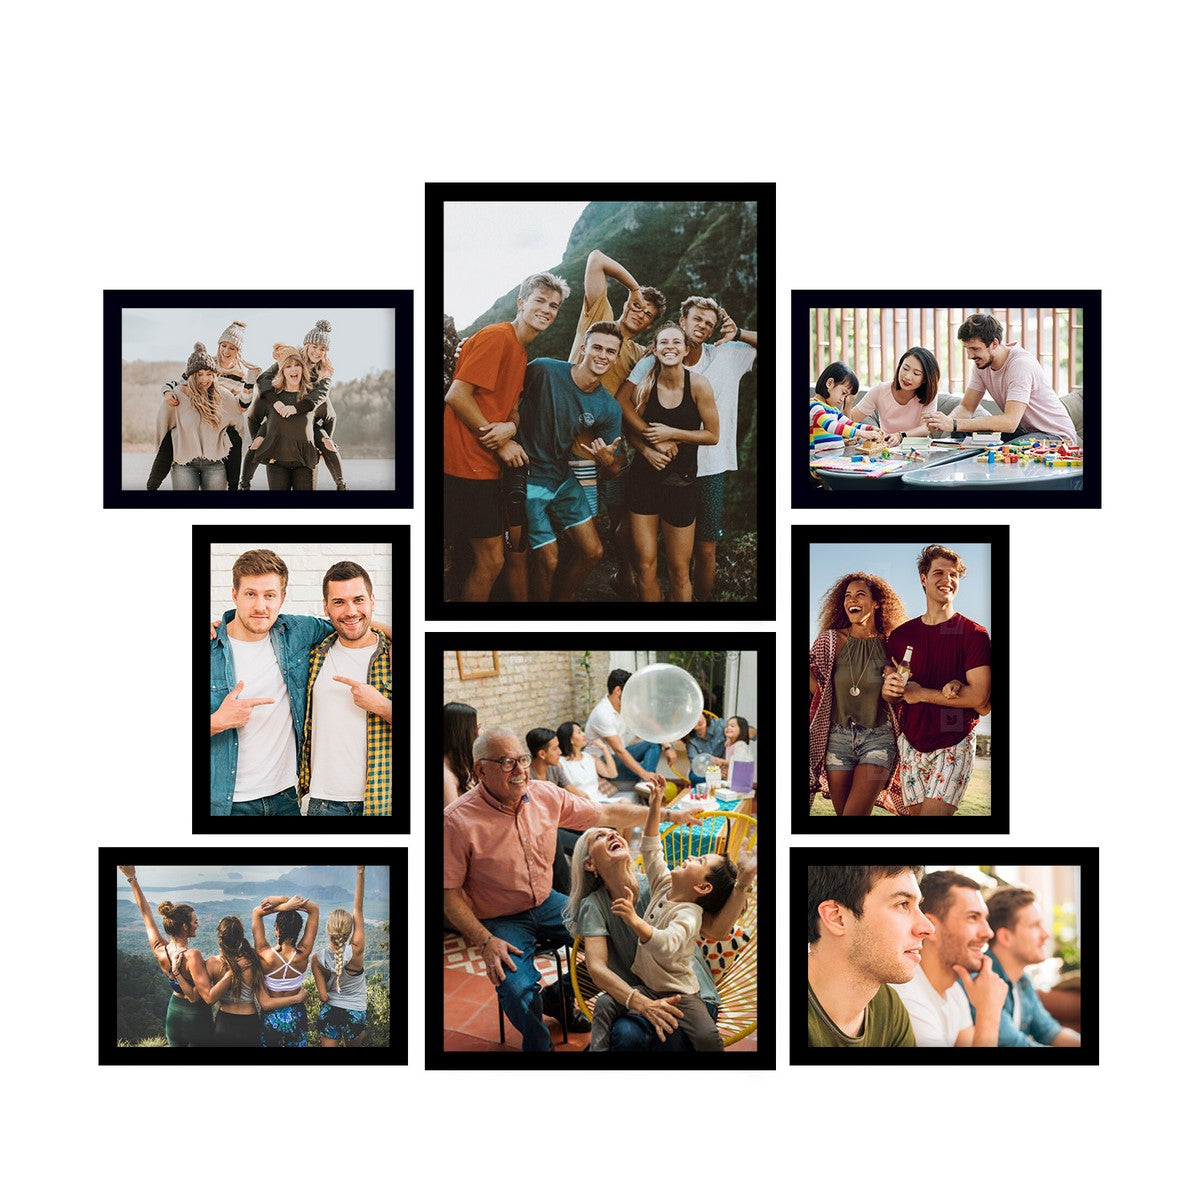 Memory Wall Collage Photo Frame - Set of 8 Photo Frames for 6 Photos of 5"x7", 2 Photos of 8"x10"